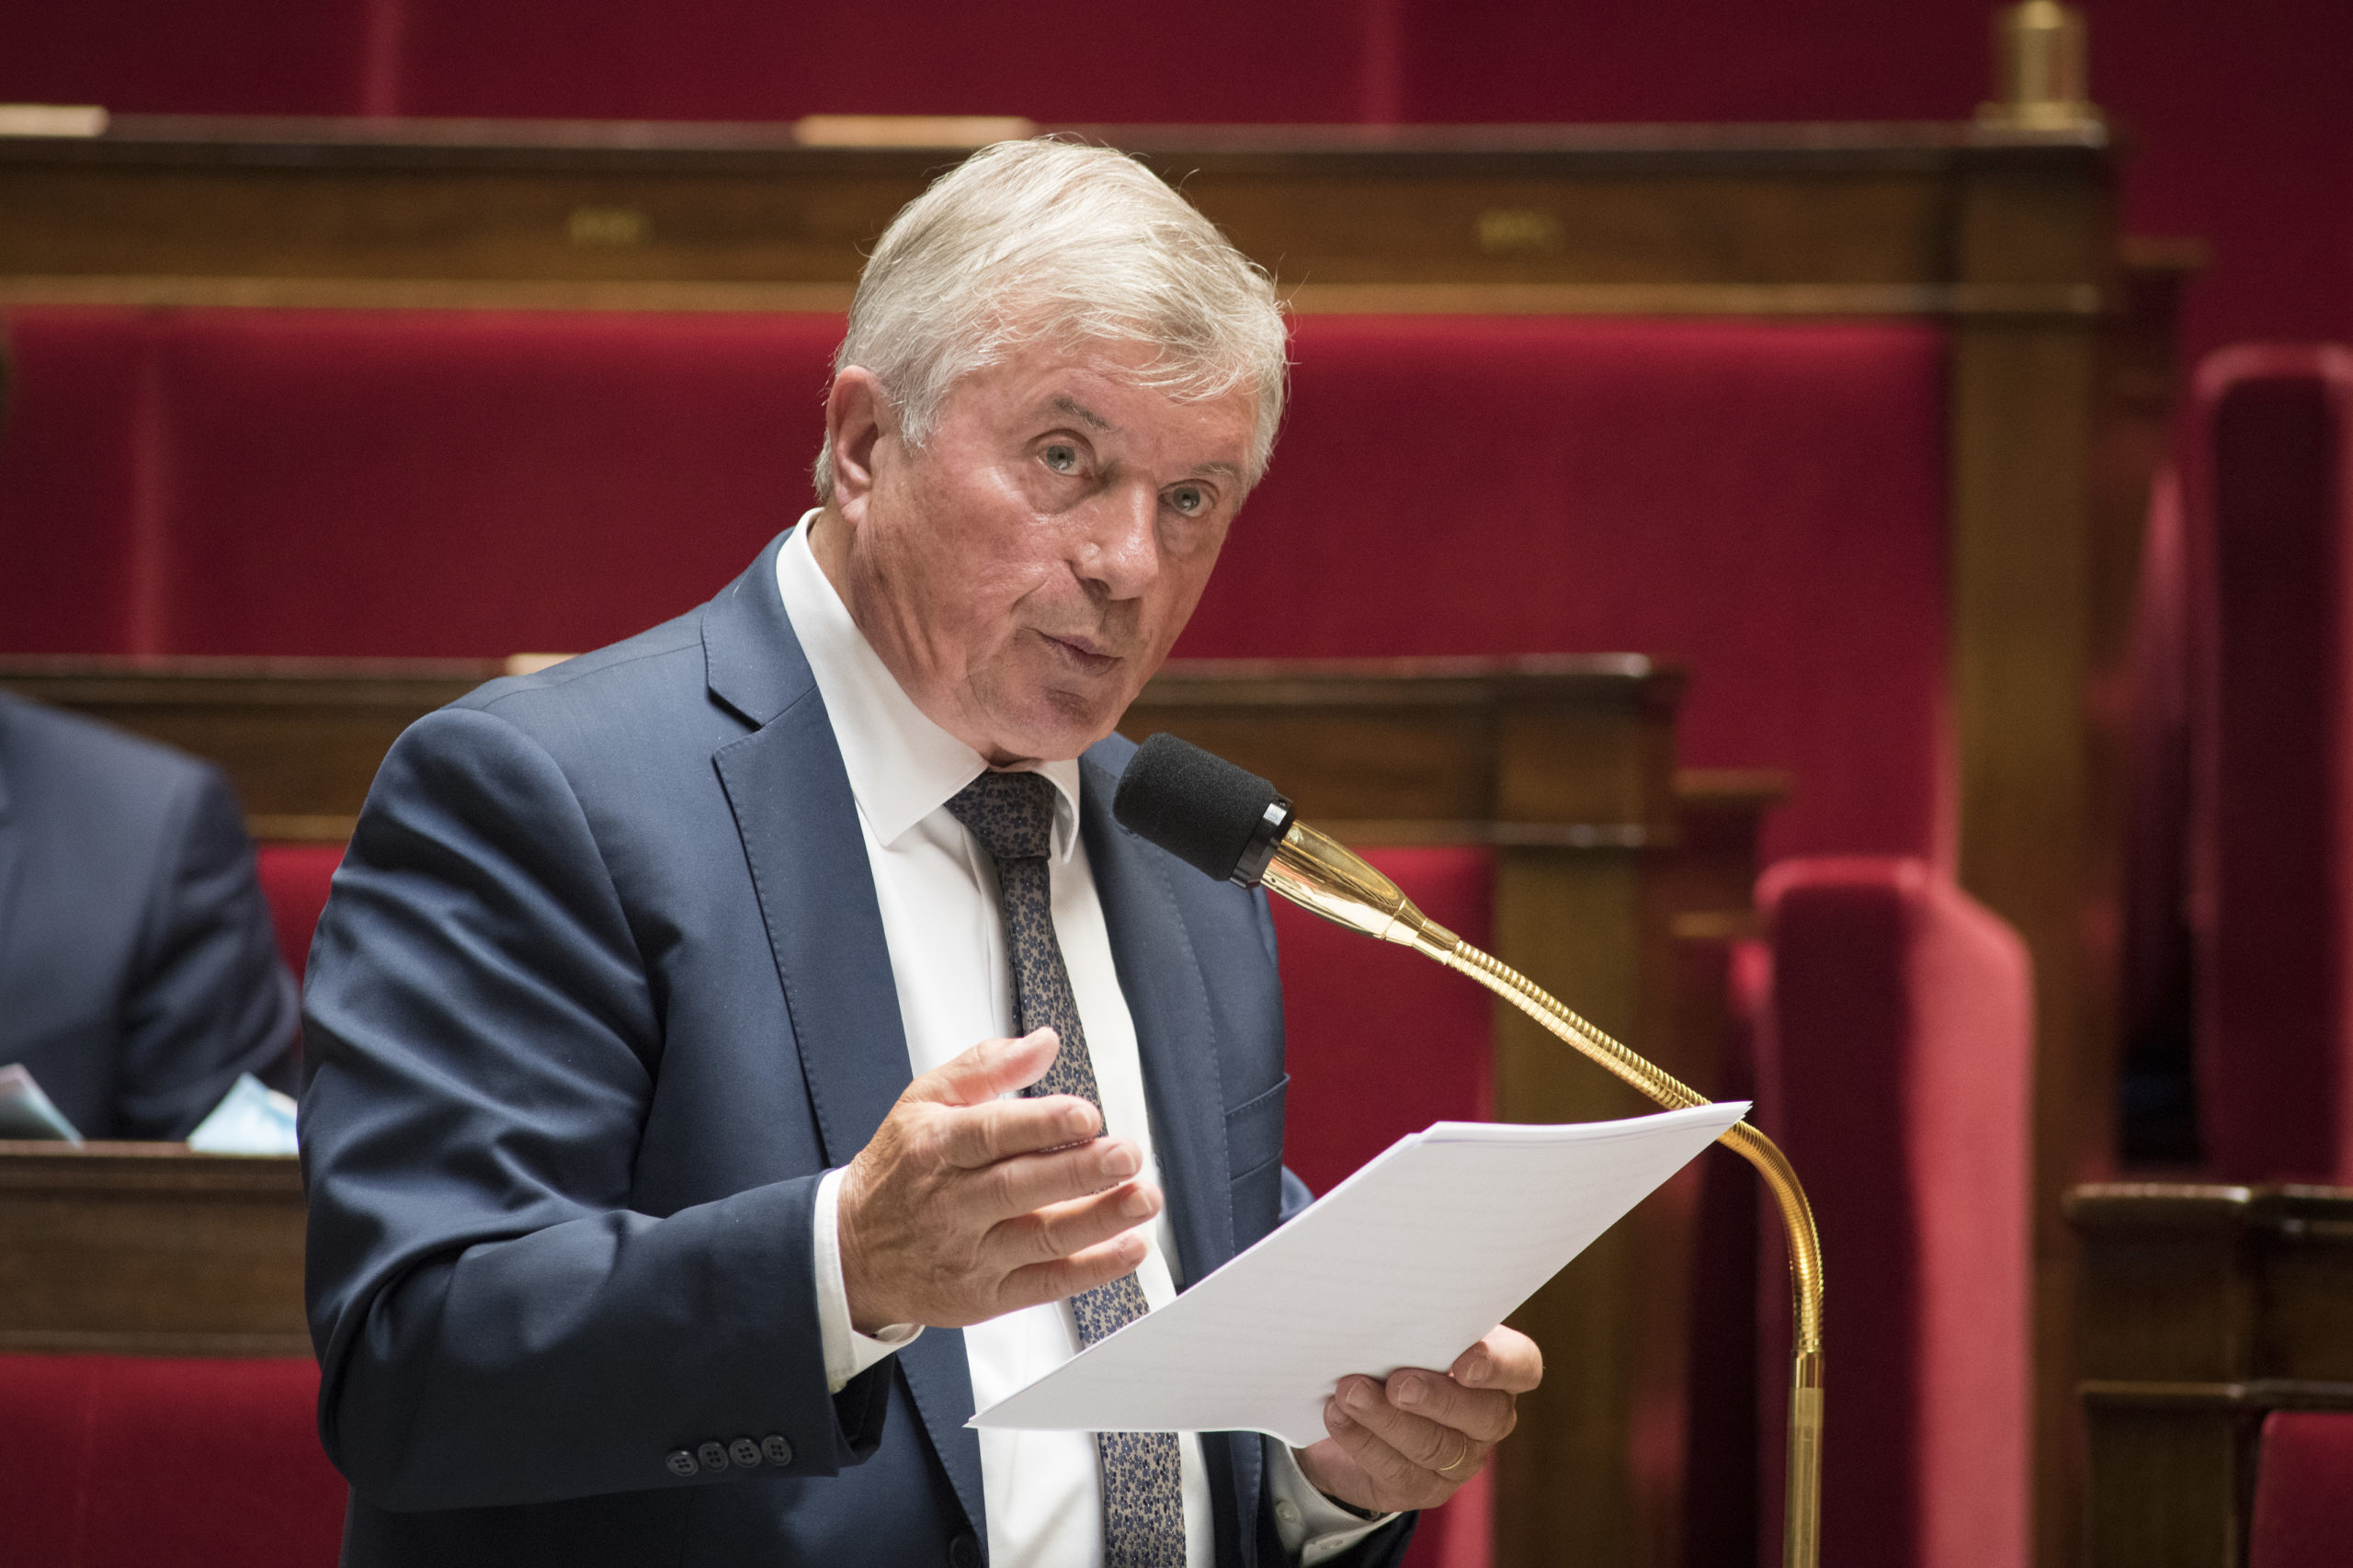 guy bricout depute udi assemblee nationale